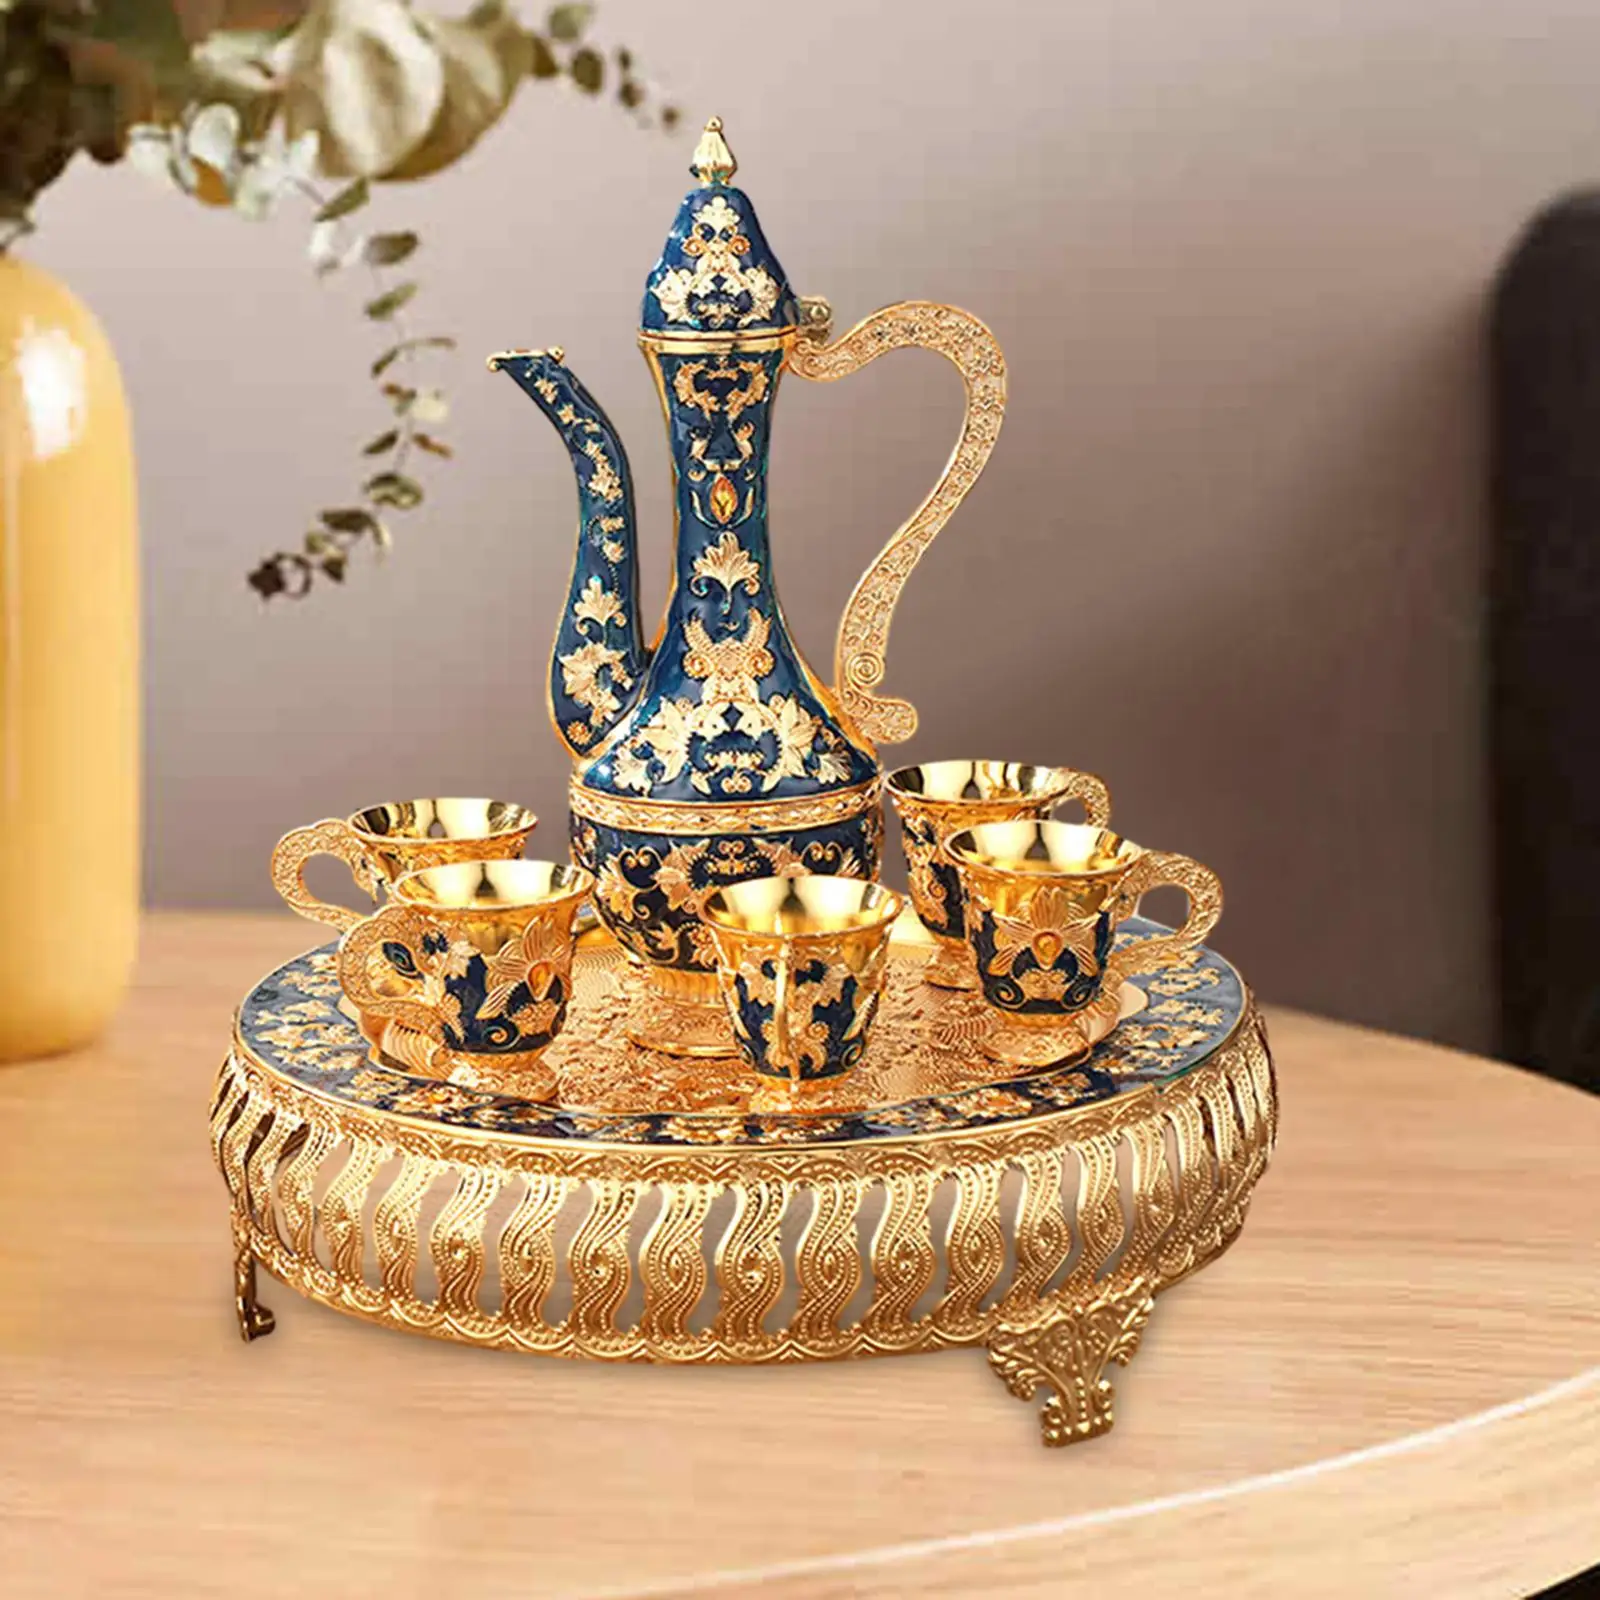 Tea Set Luxury 6 Cups Tea Serving Set for Dining Table Holiday Decor